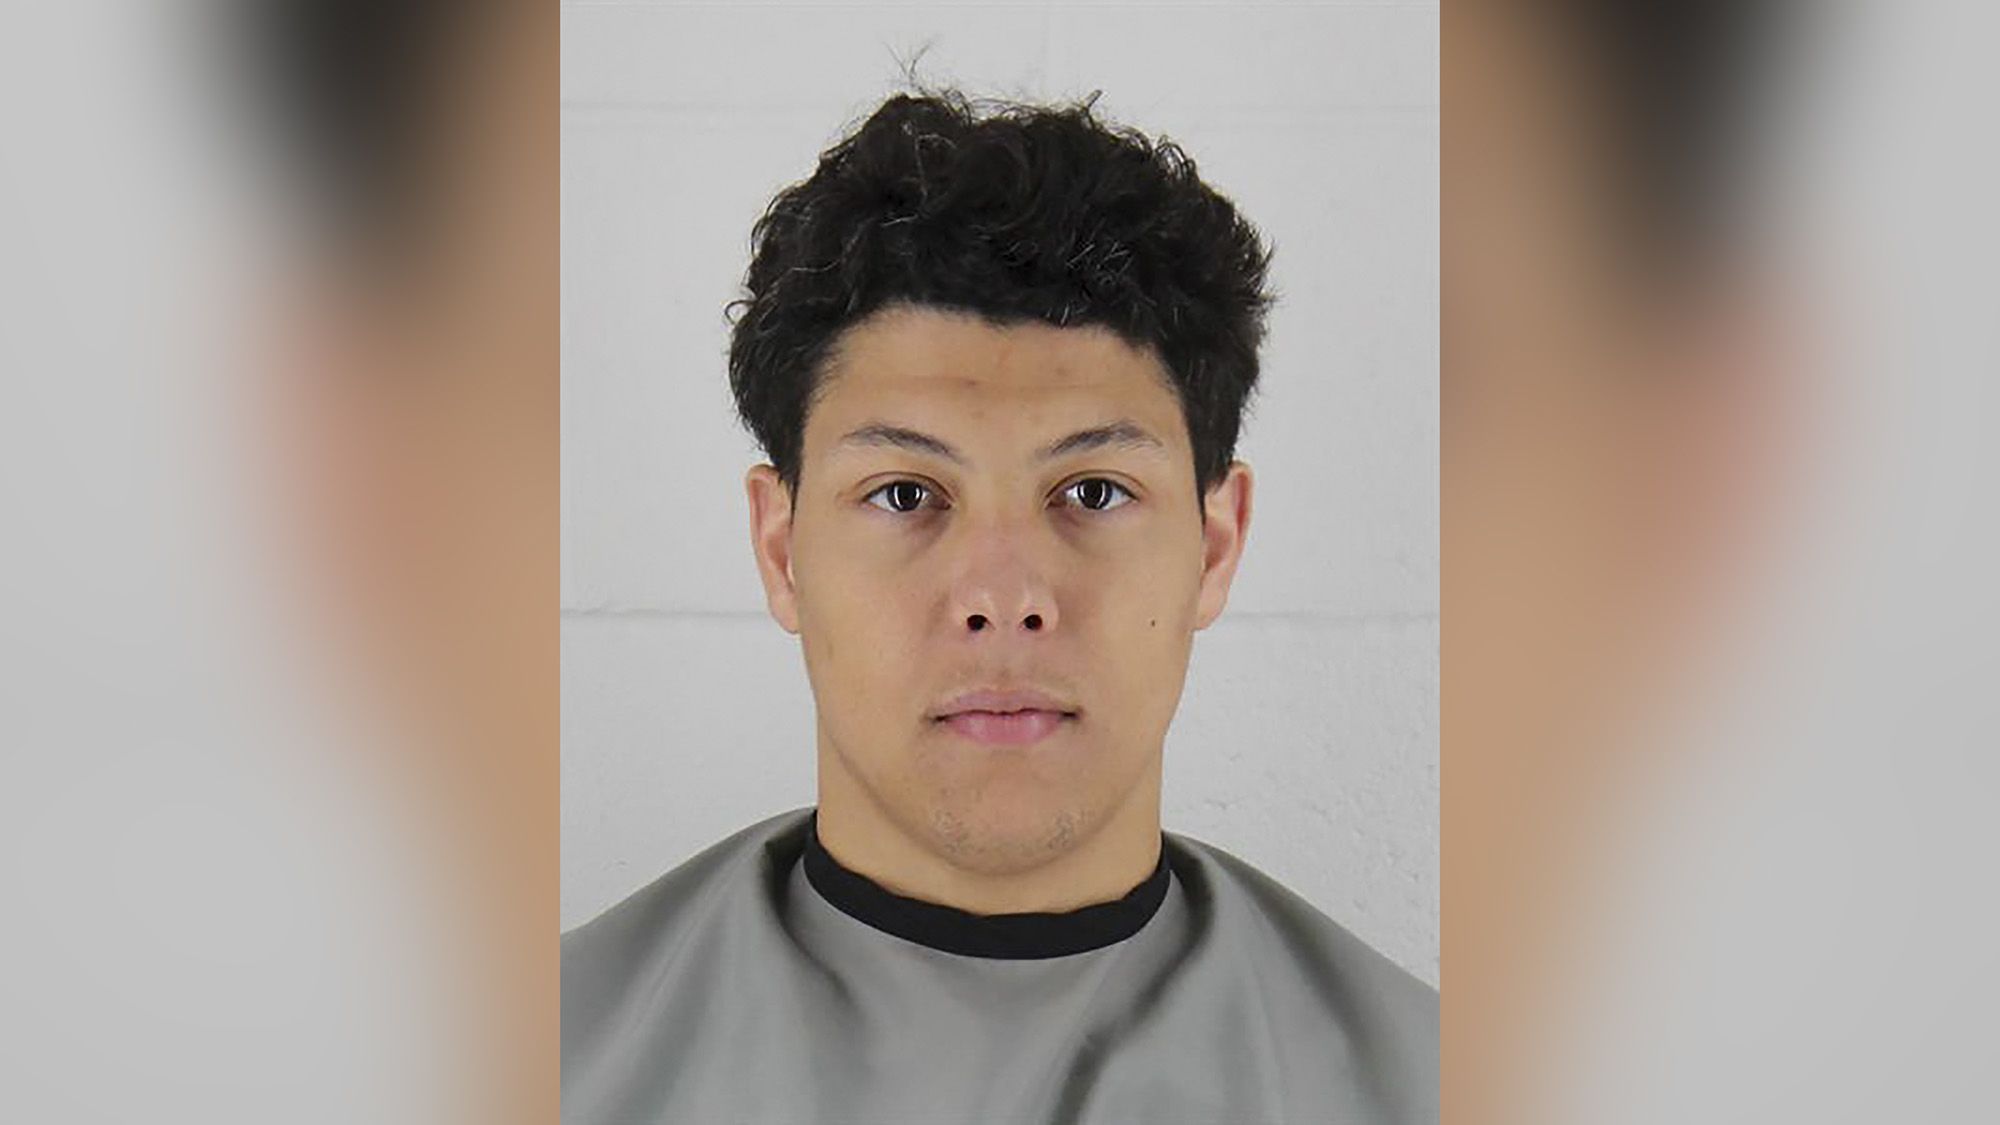 Jackson Mahomes, brother of Chiefs quarterback, accused of assault